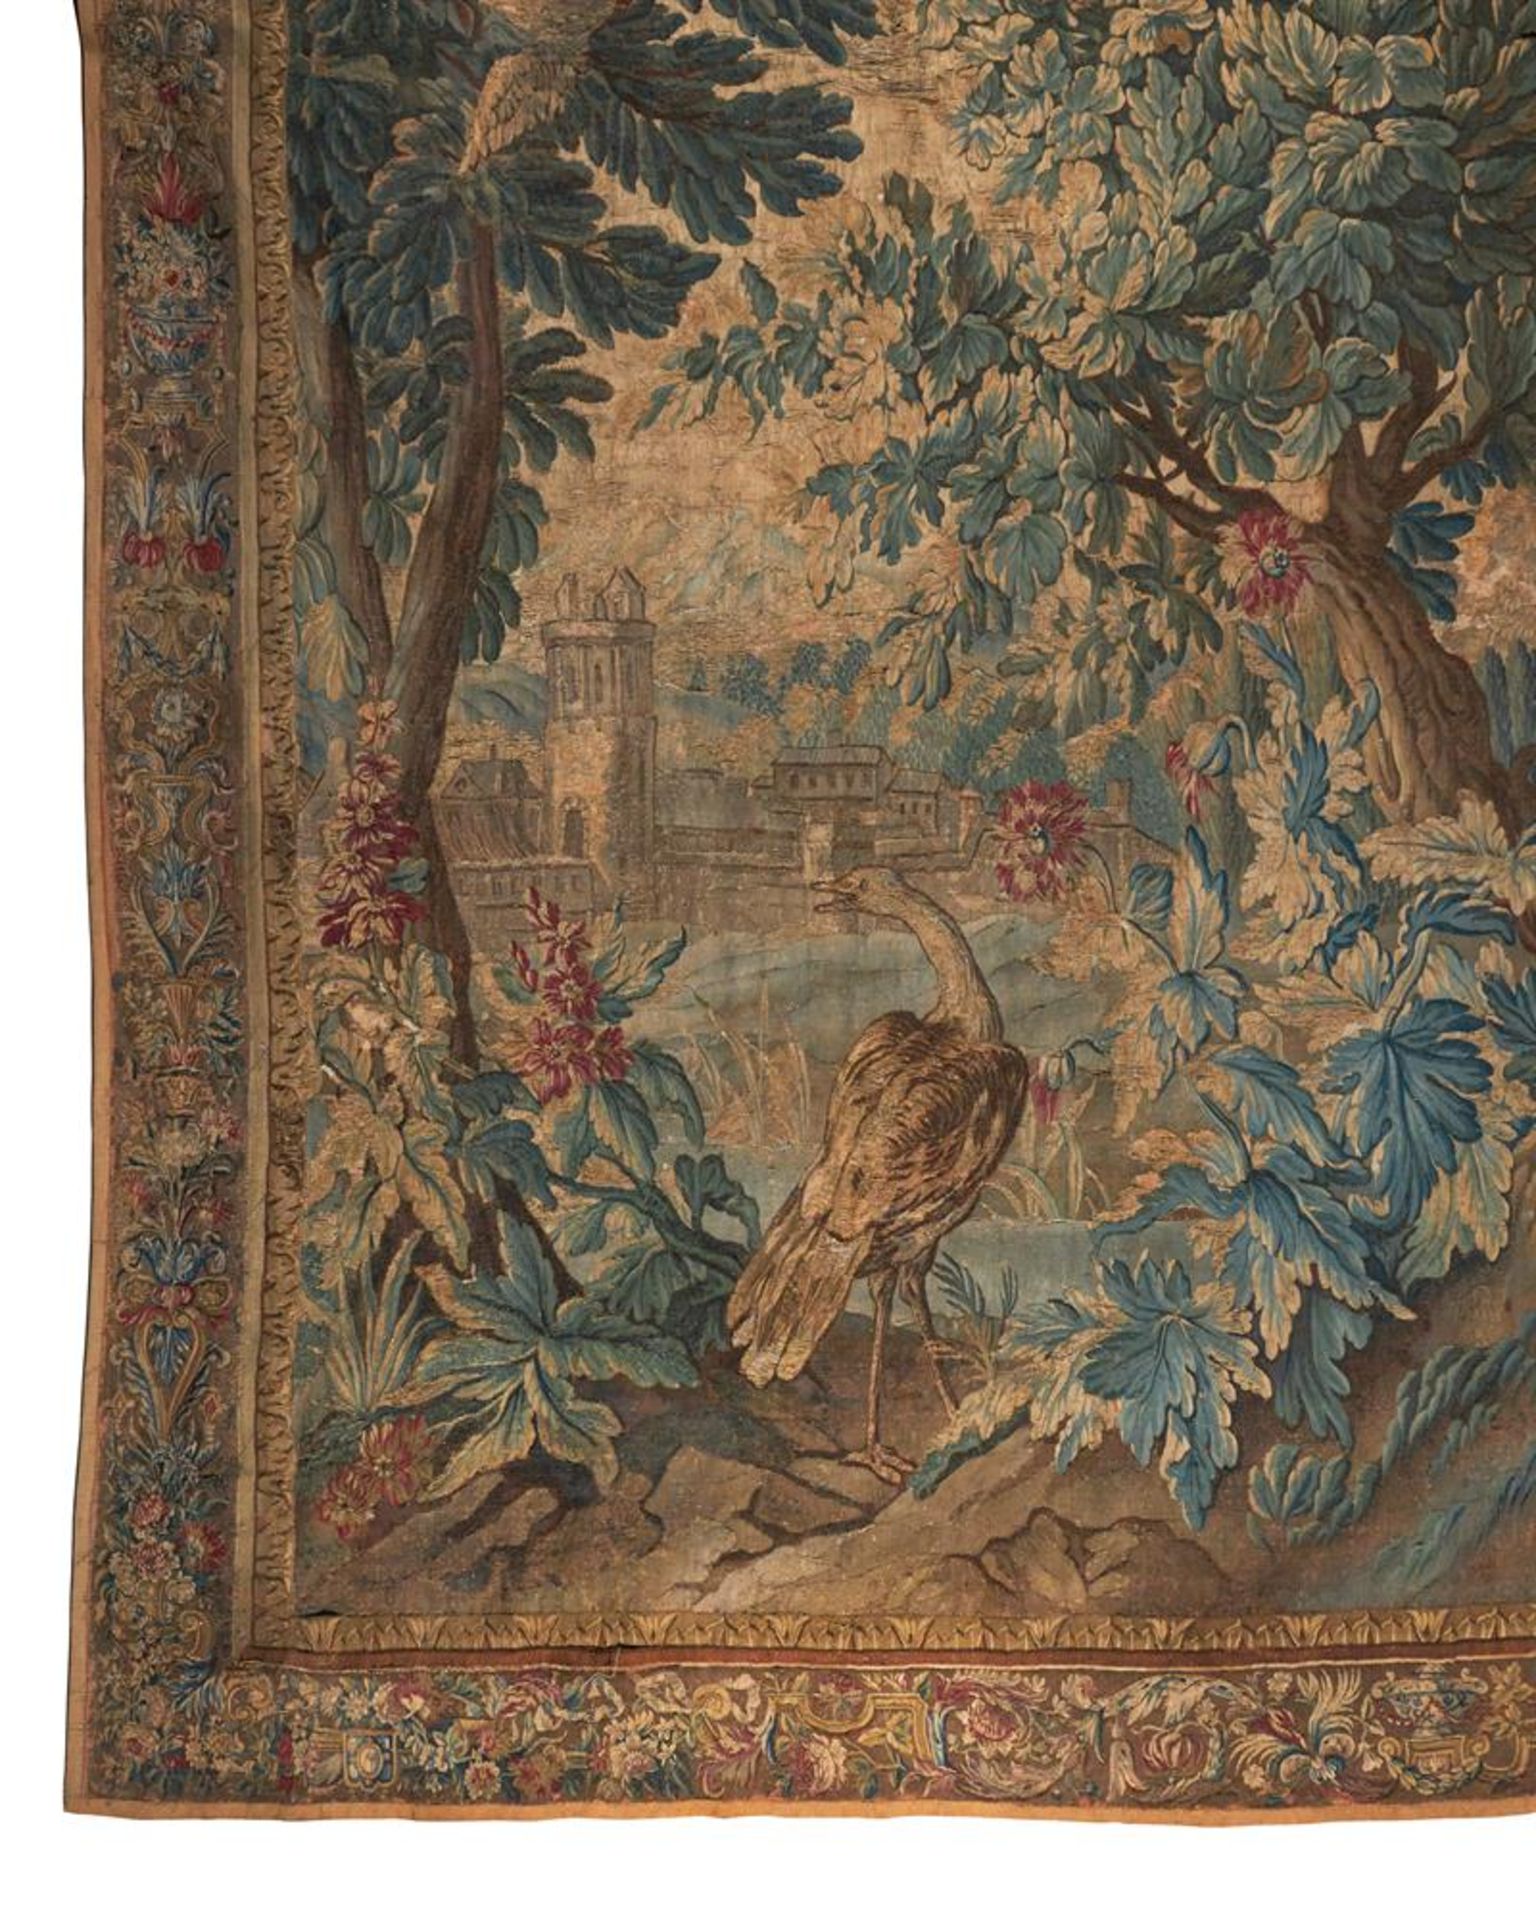 A FRENCH VERDURE TAPESTRY, EARLY 18TH CENTURY - Image 2 of 5